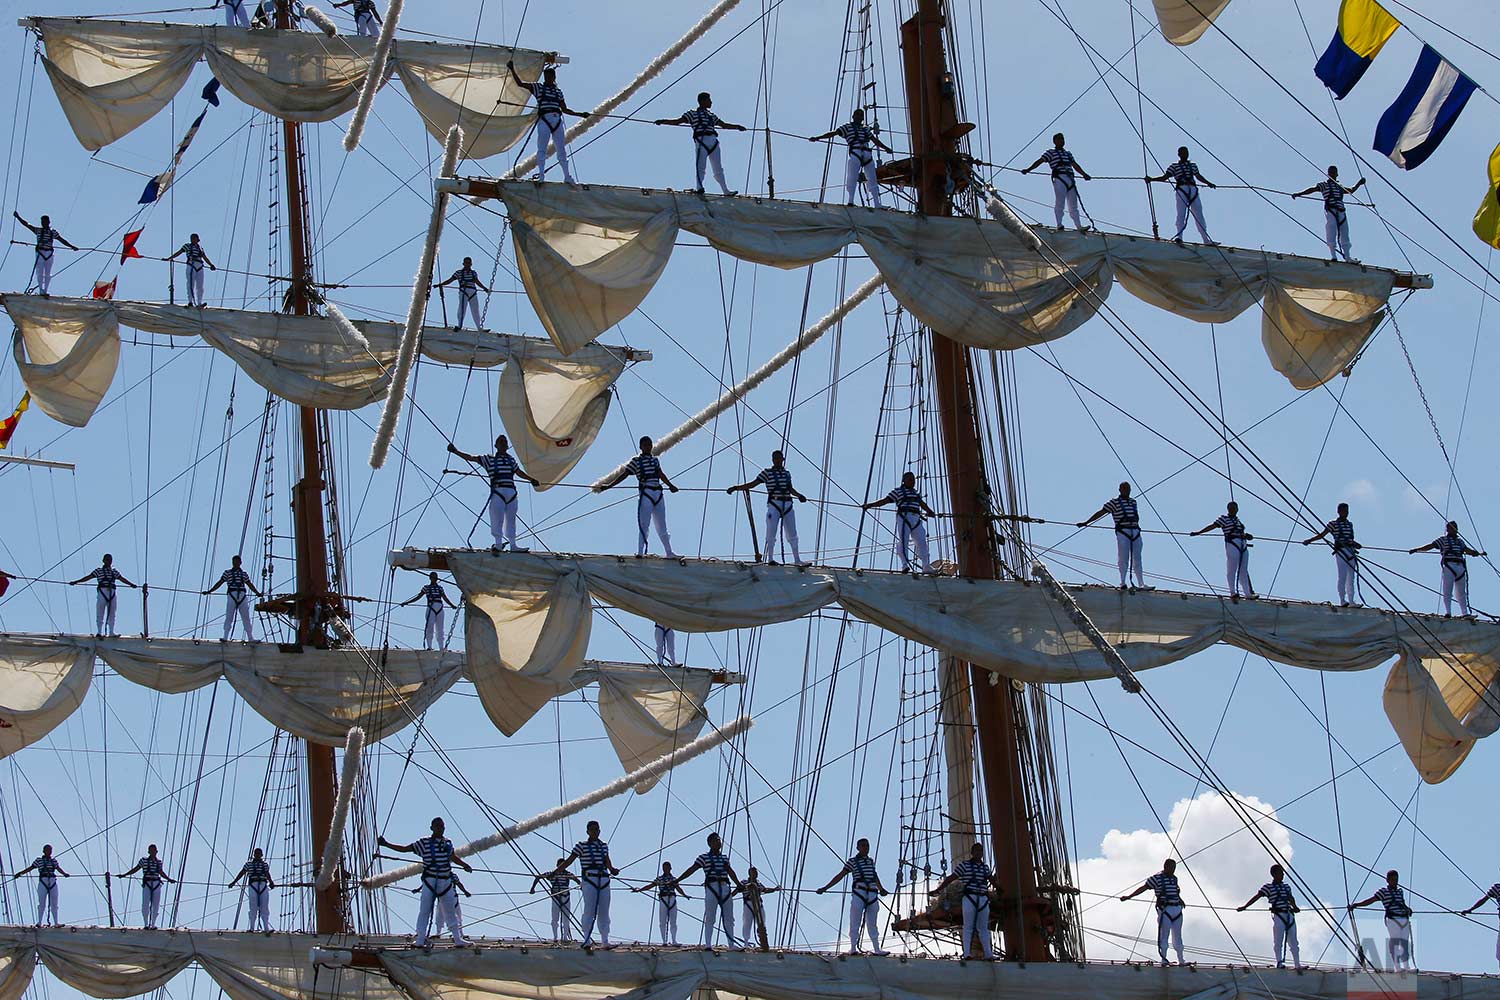  Mexican Navy crew members stand on the sails of the ARM Cuauhtemoc tall ship as it prepares to dock in the South Harbor in Manila, Philippines, for a five-day goodwill visit starting Friday, Aug. 4, 2017. (AP Photo/Bullit Marquez) 